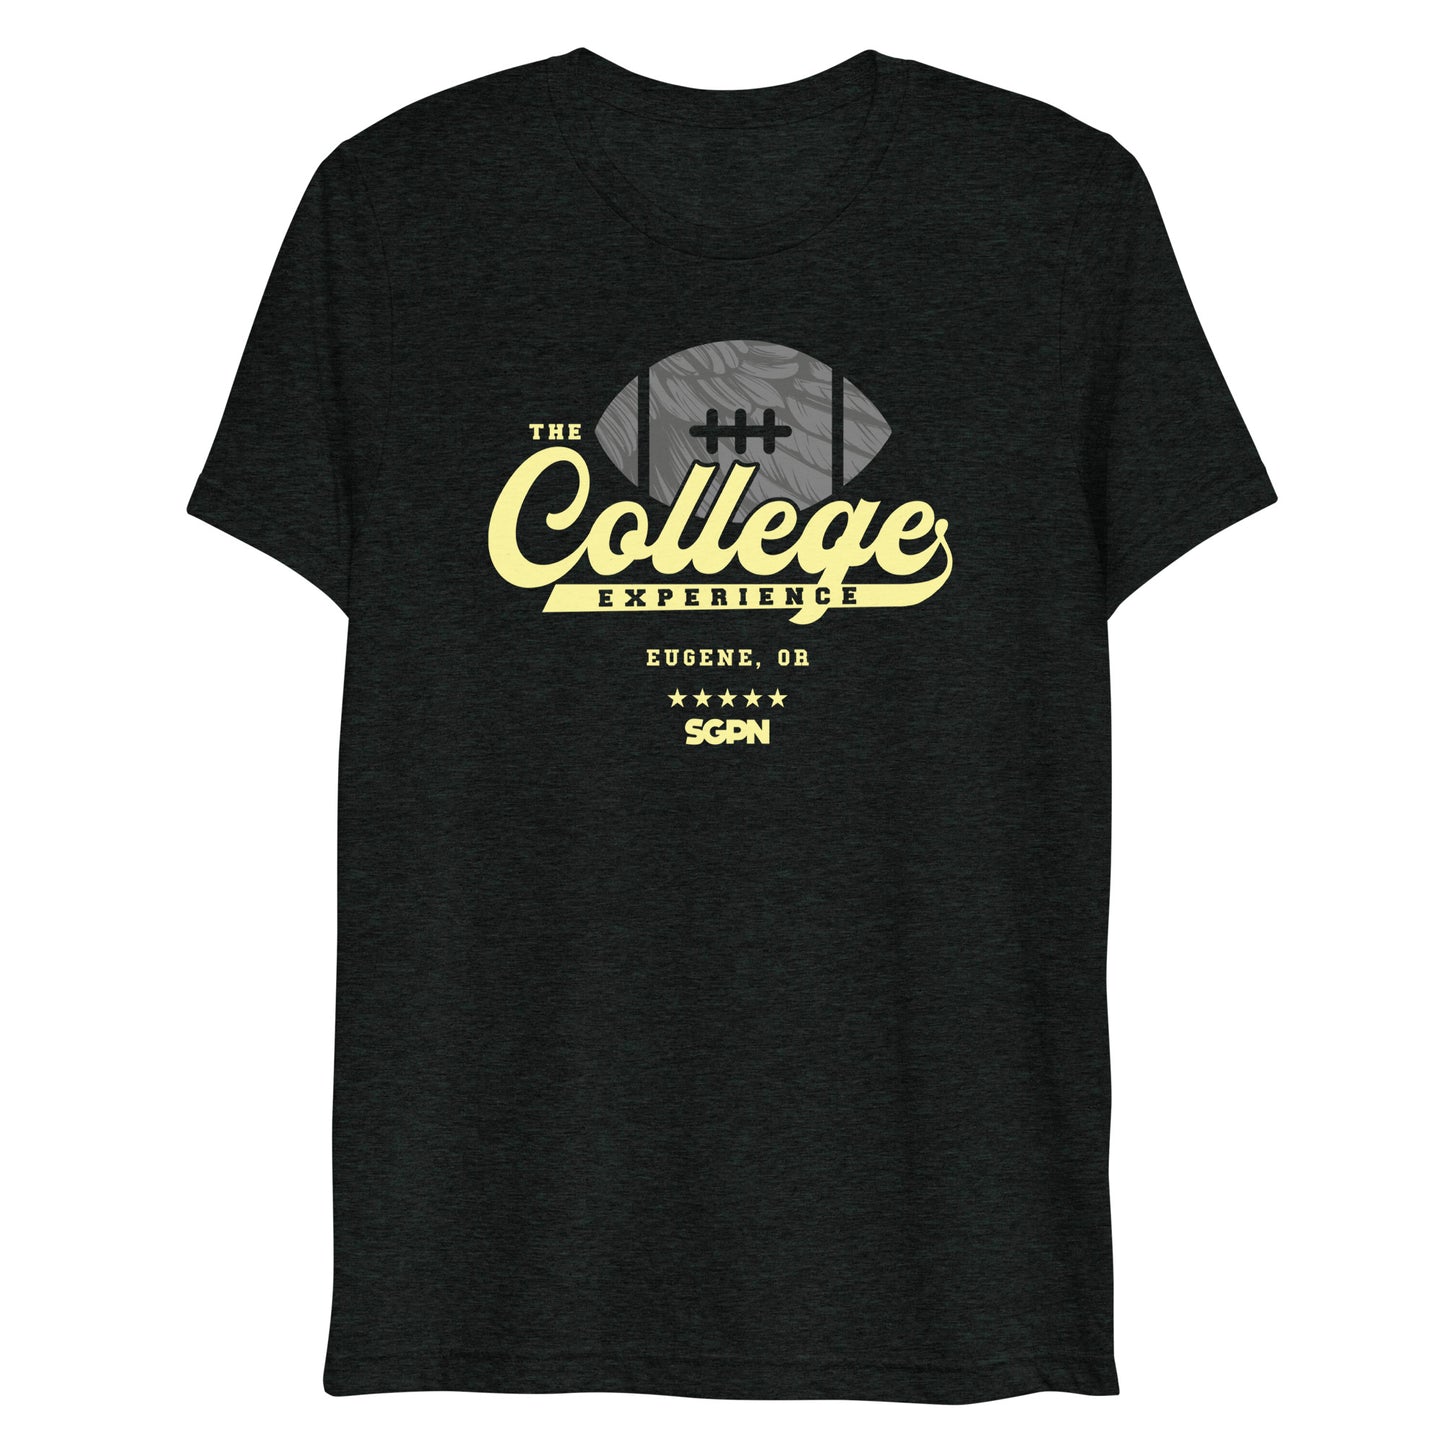 The College Football Experience - Eugene edition - Charcoal Black Short sleeve t-shirt